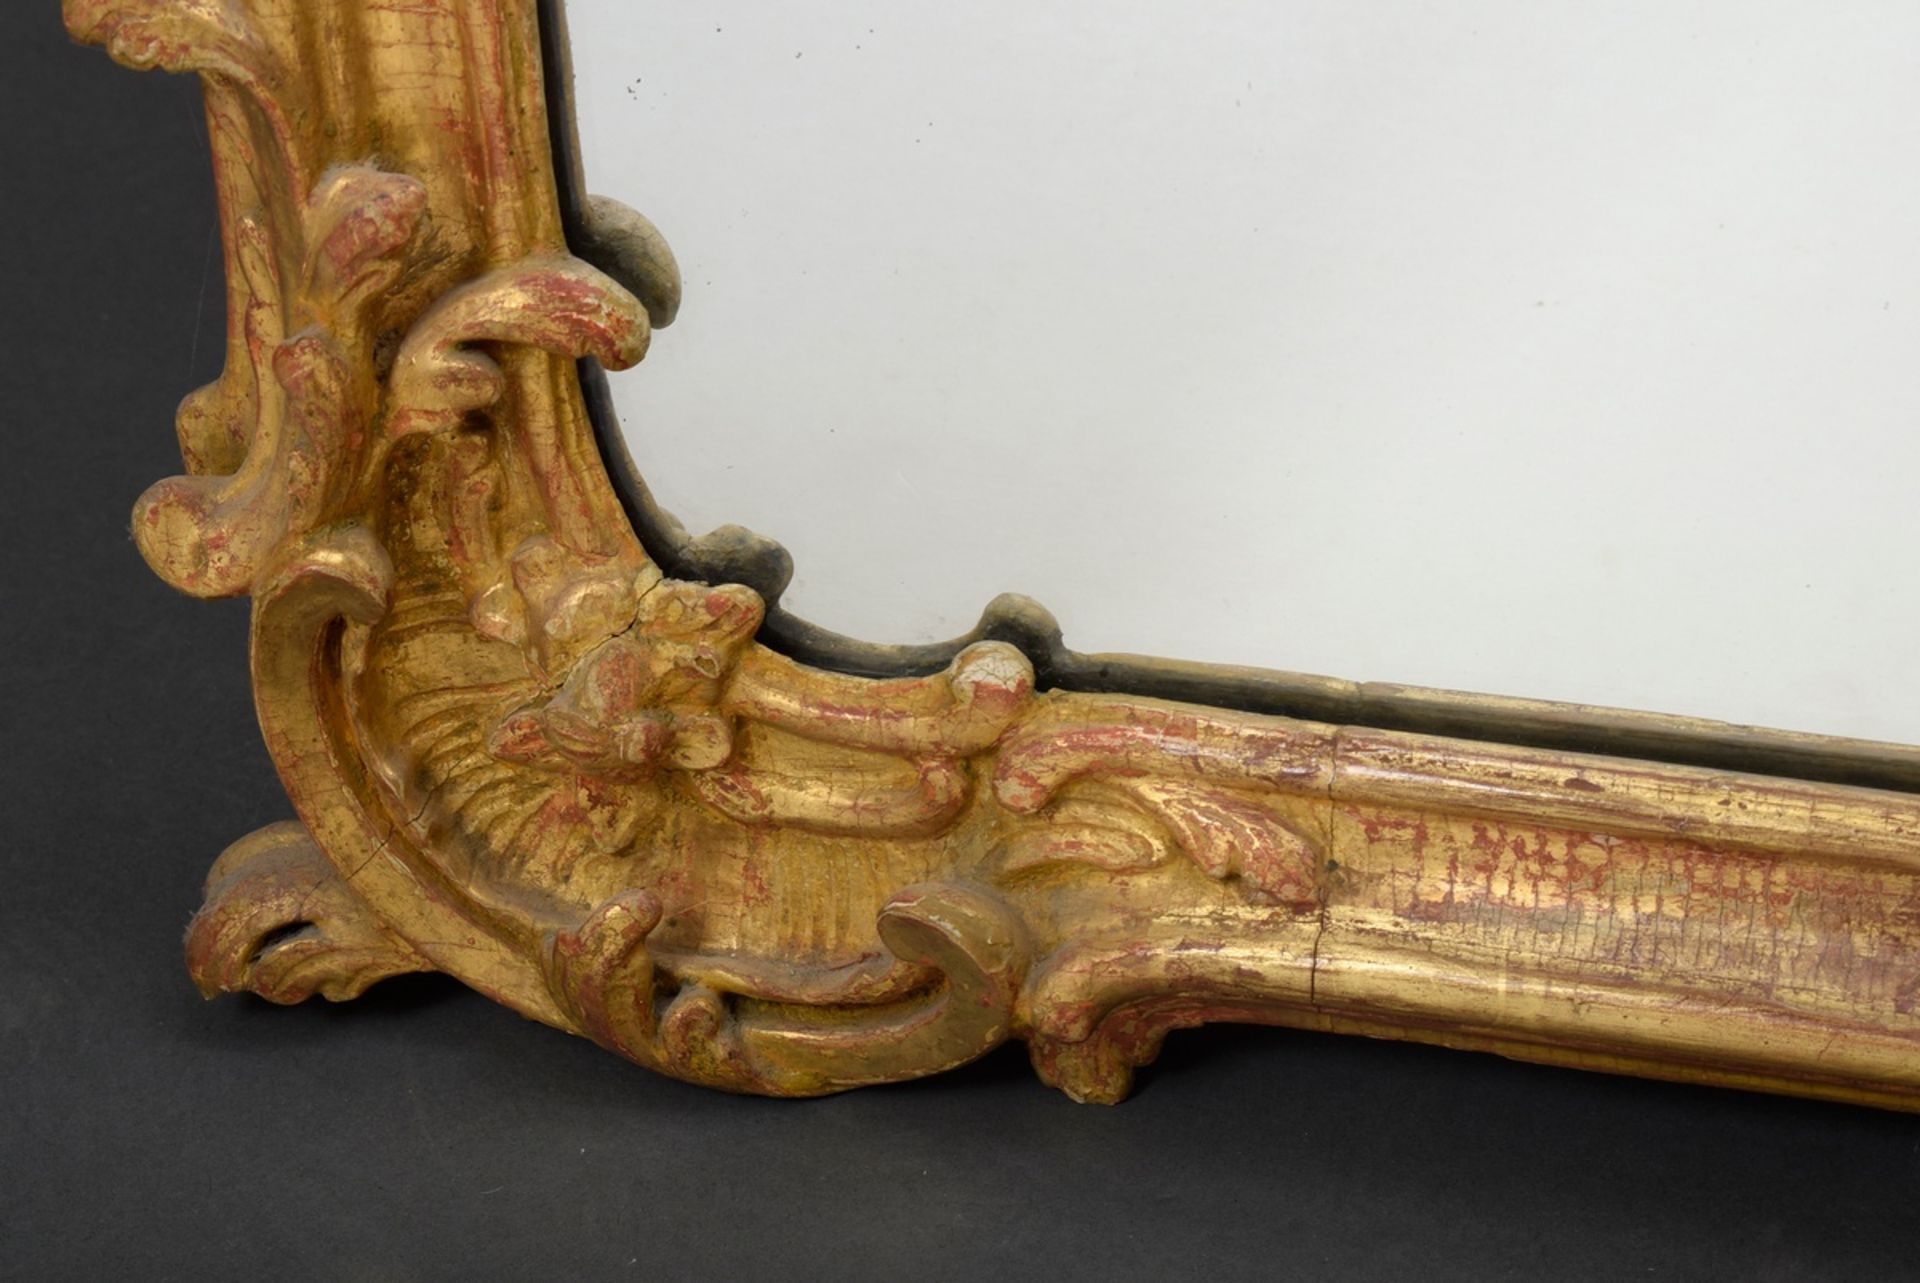 Large rococo console mirror with carved and gilded frame, openwork rocaille and floral carving in t - Image 3 of 5